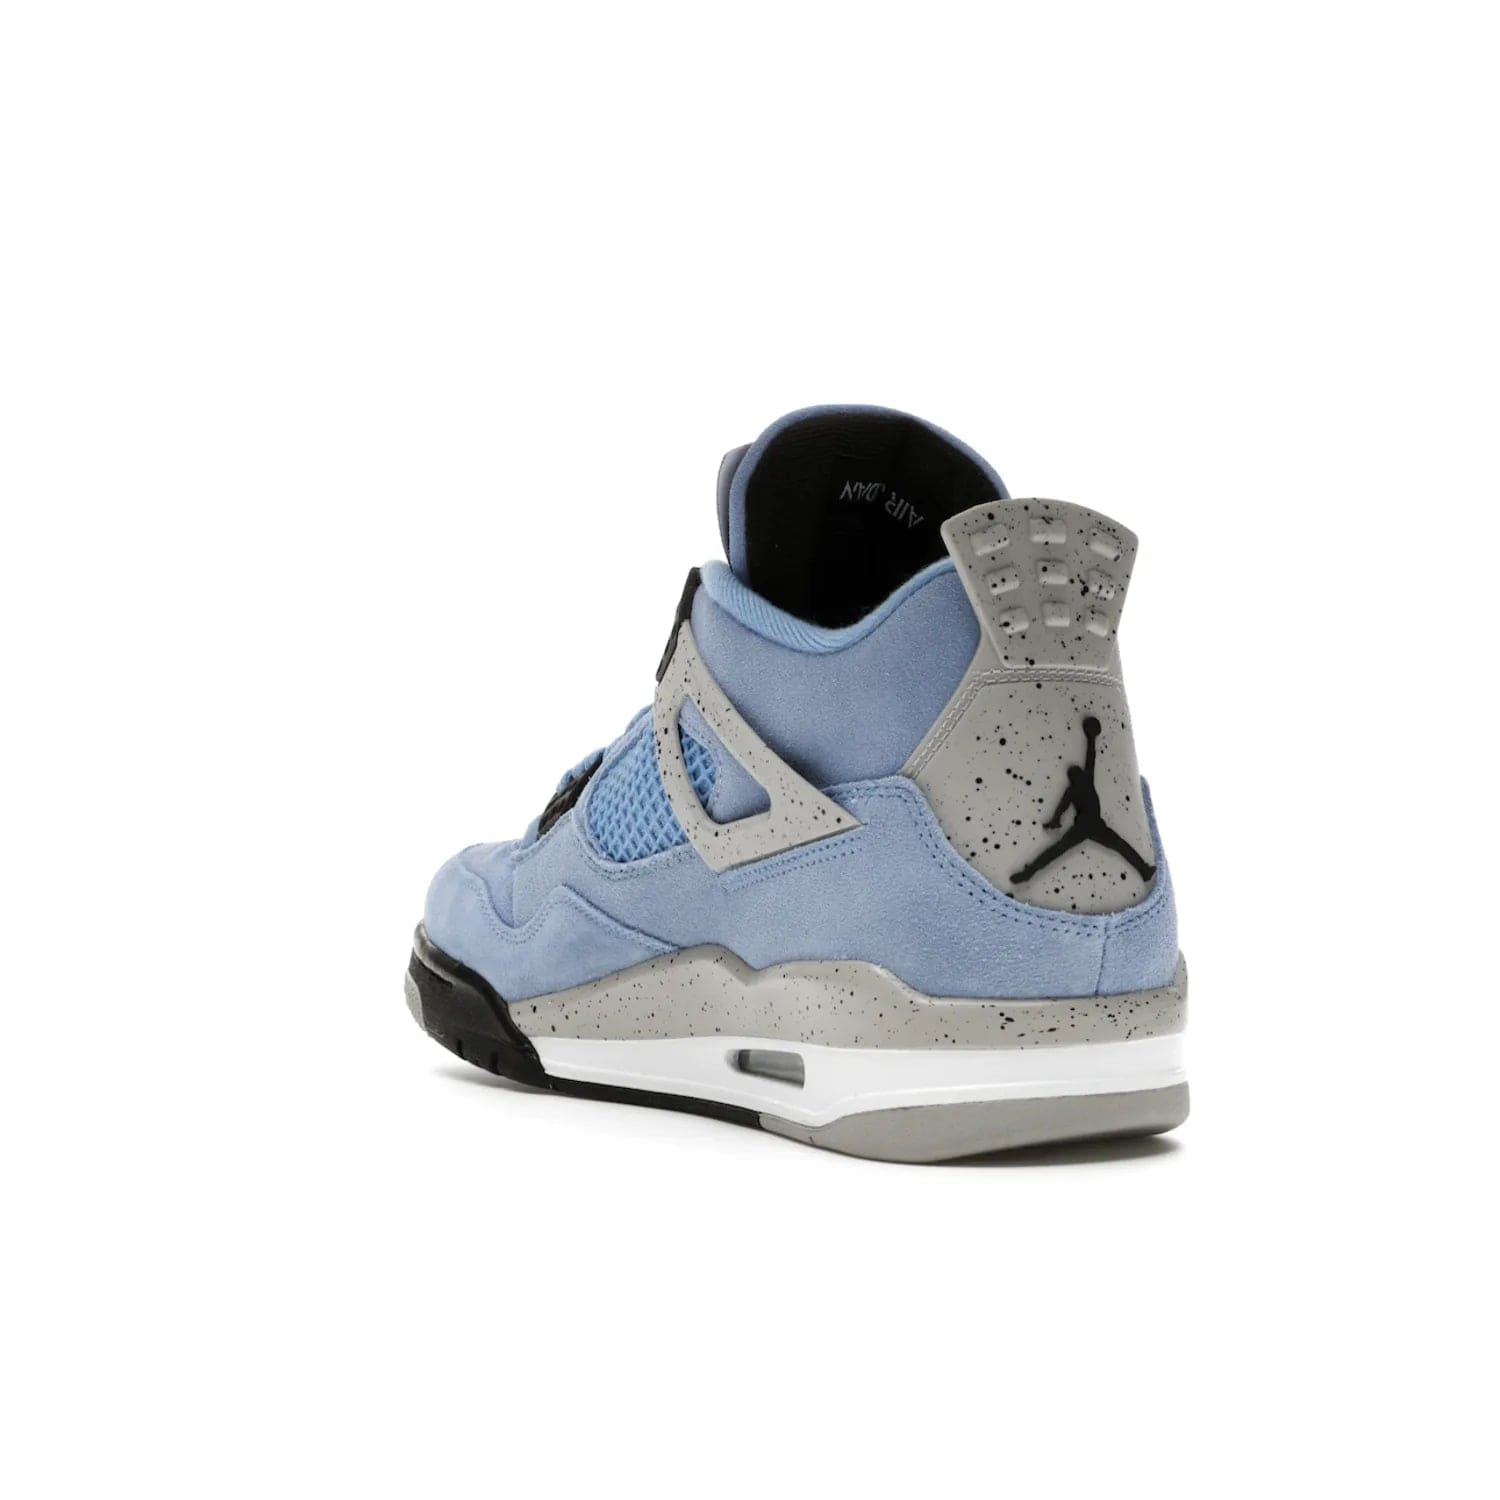 Jordan 4 Retro University Blue - Image 25 - Only at www.BallersClubKickz.com - The Air Jordan 4 University Blue honors MJ's alma mater. Rich University Blue suede, panels of netting, and Cement Grey speckled eyelets give this design an edgy look. Features a black, white and Tech Grey sole with a clear Air unit and two woven labels on the tongue. Jumpman logo & Team Jordan jock tag included. Released April 2021.